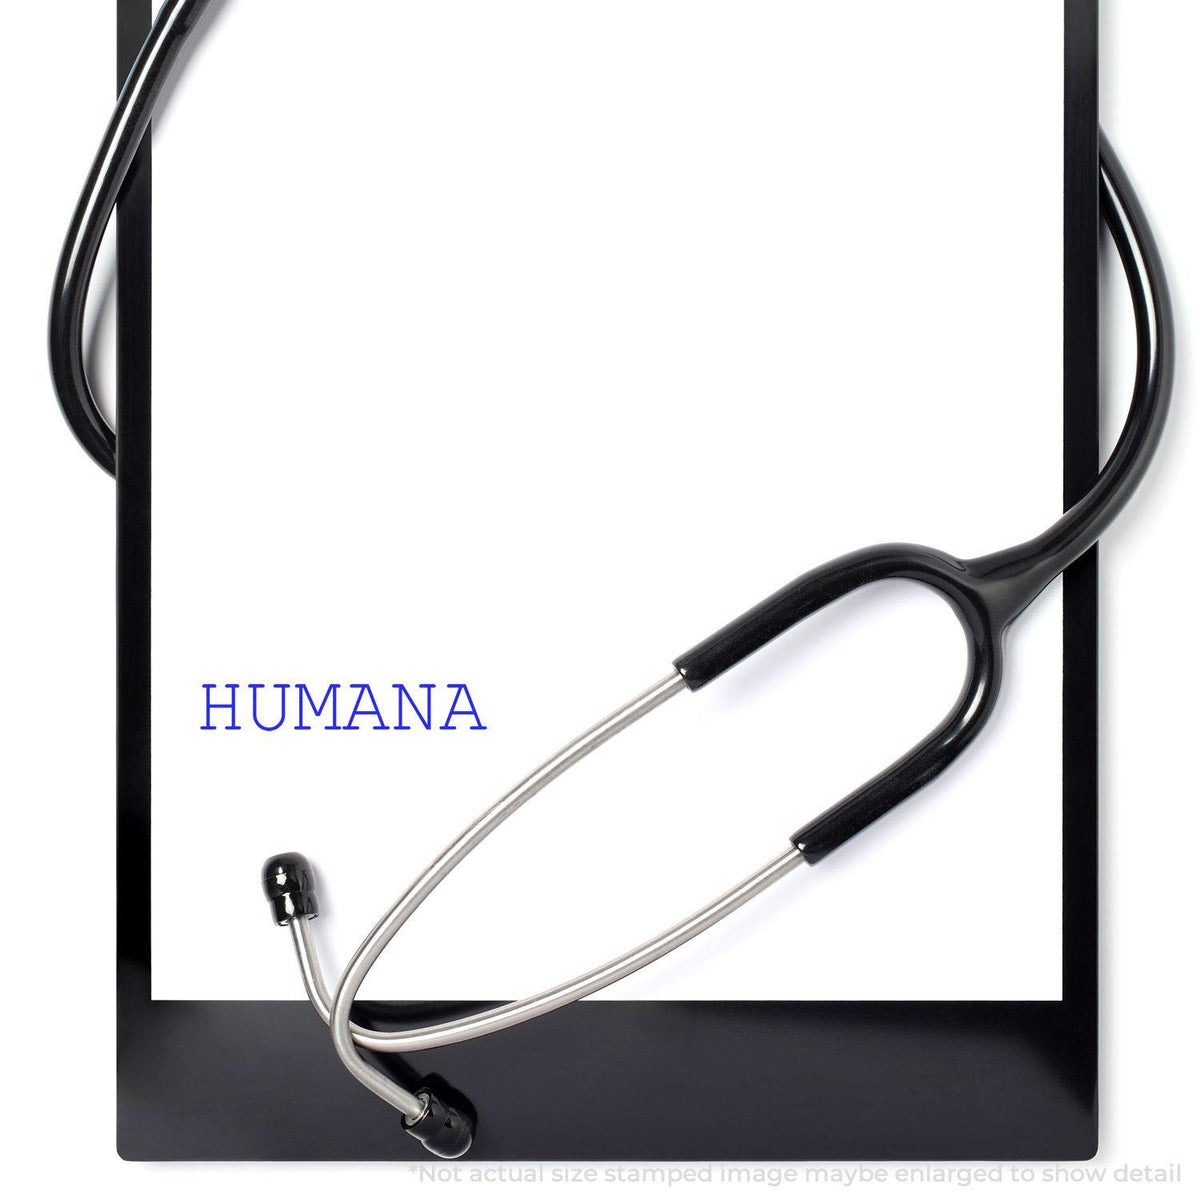 Self Inking Humana Stamp - Engineer Seal Stamps - Brand_Trodat, Impression Size_Small, Stamp Type_Self-Inking Stamp, Type of Use_Medical Office